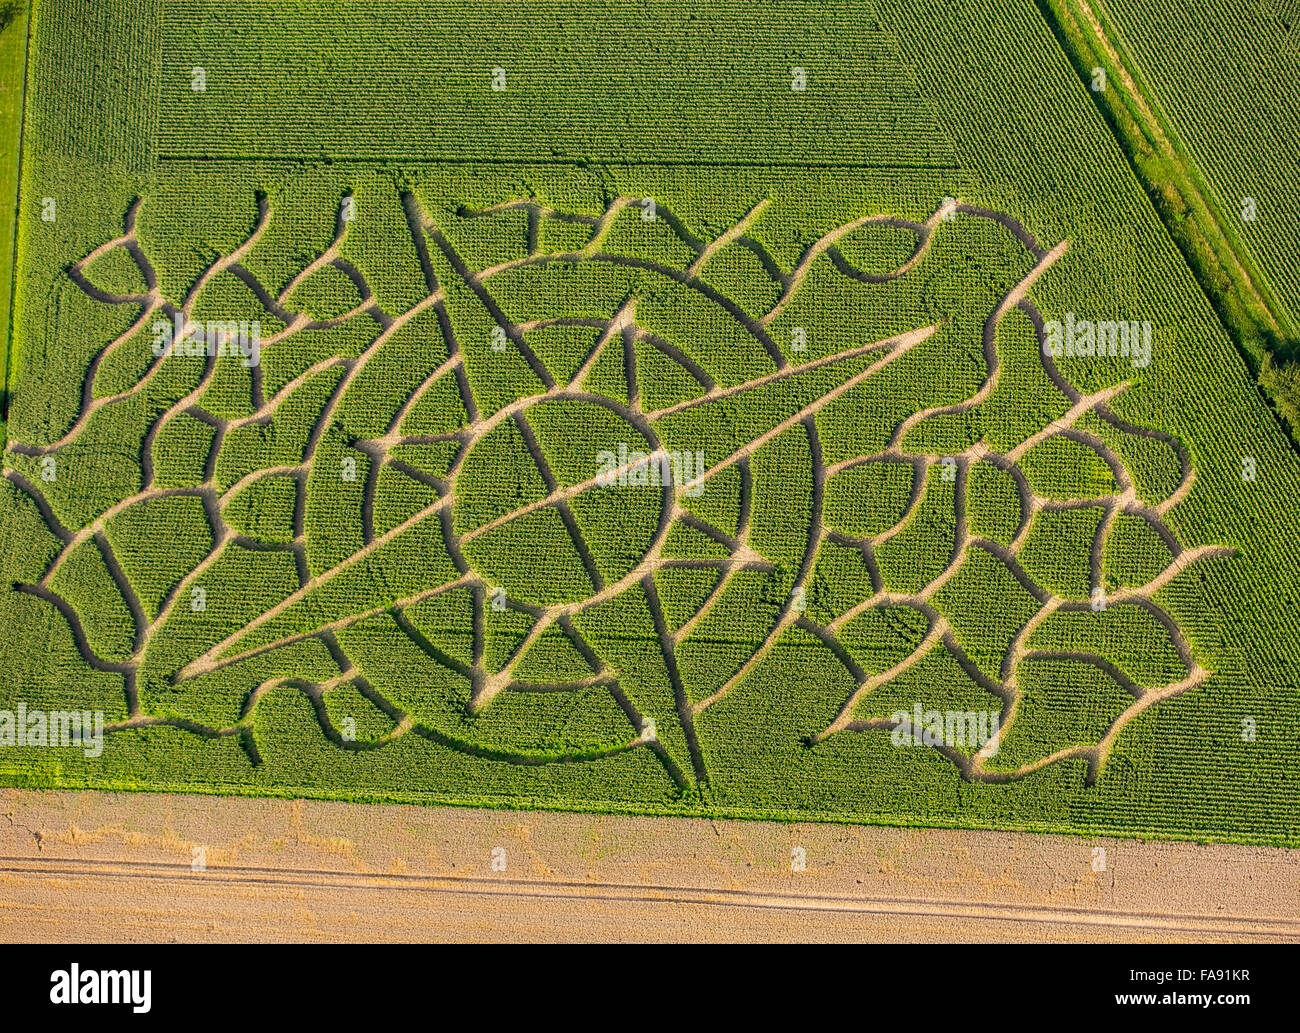 Corn maze in the shape of a compass rose, maize art, maze, vegetable farm Eickhoff in Soest, Soest, Soest Börde, Bad Sassendorf, Stock Photo